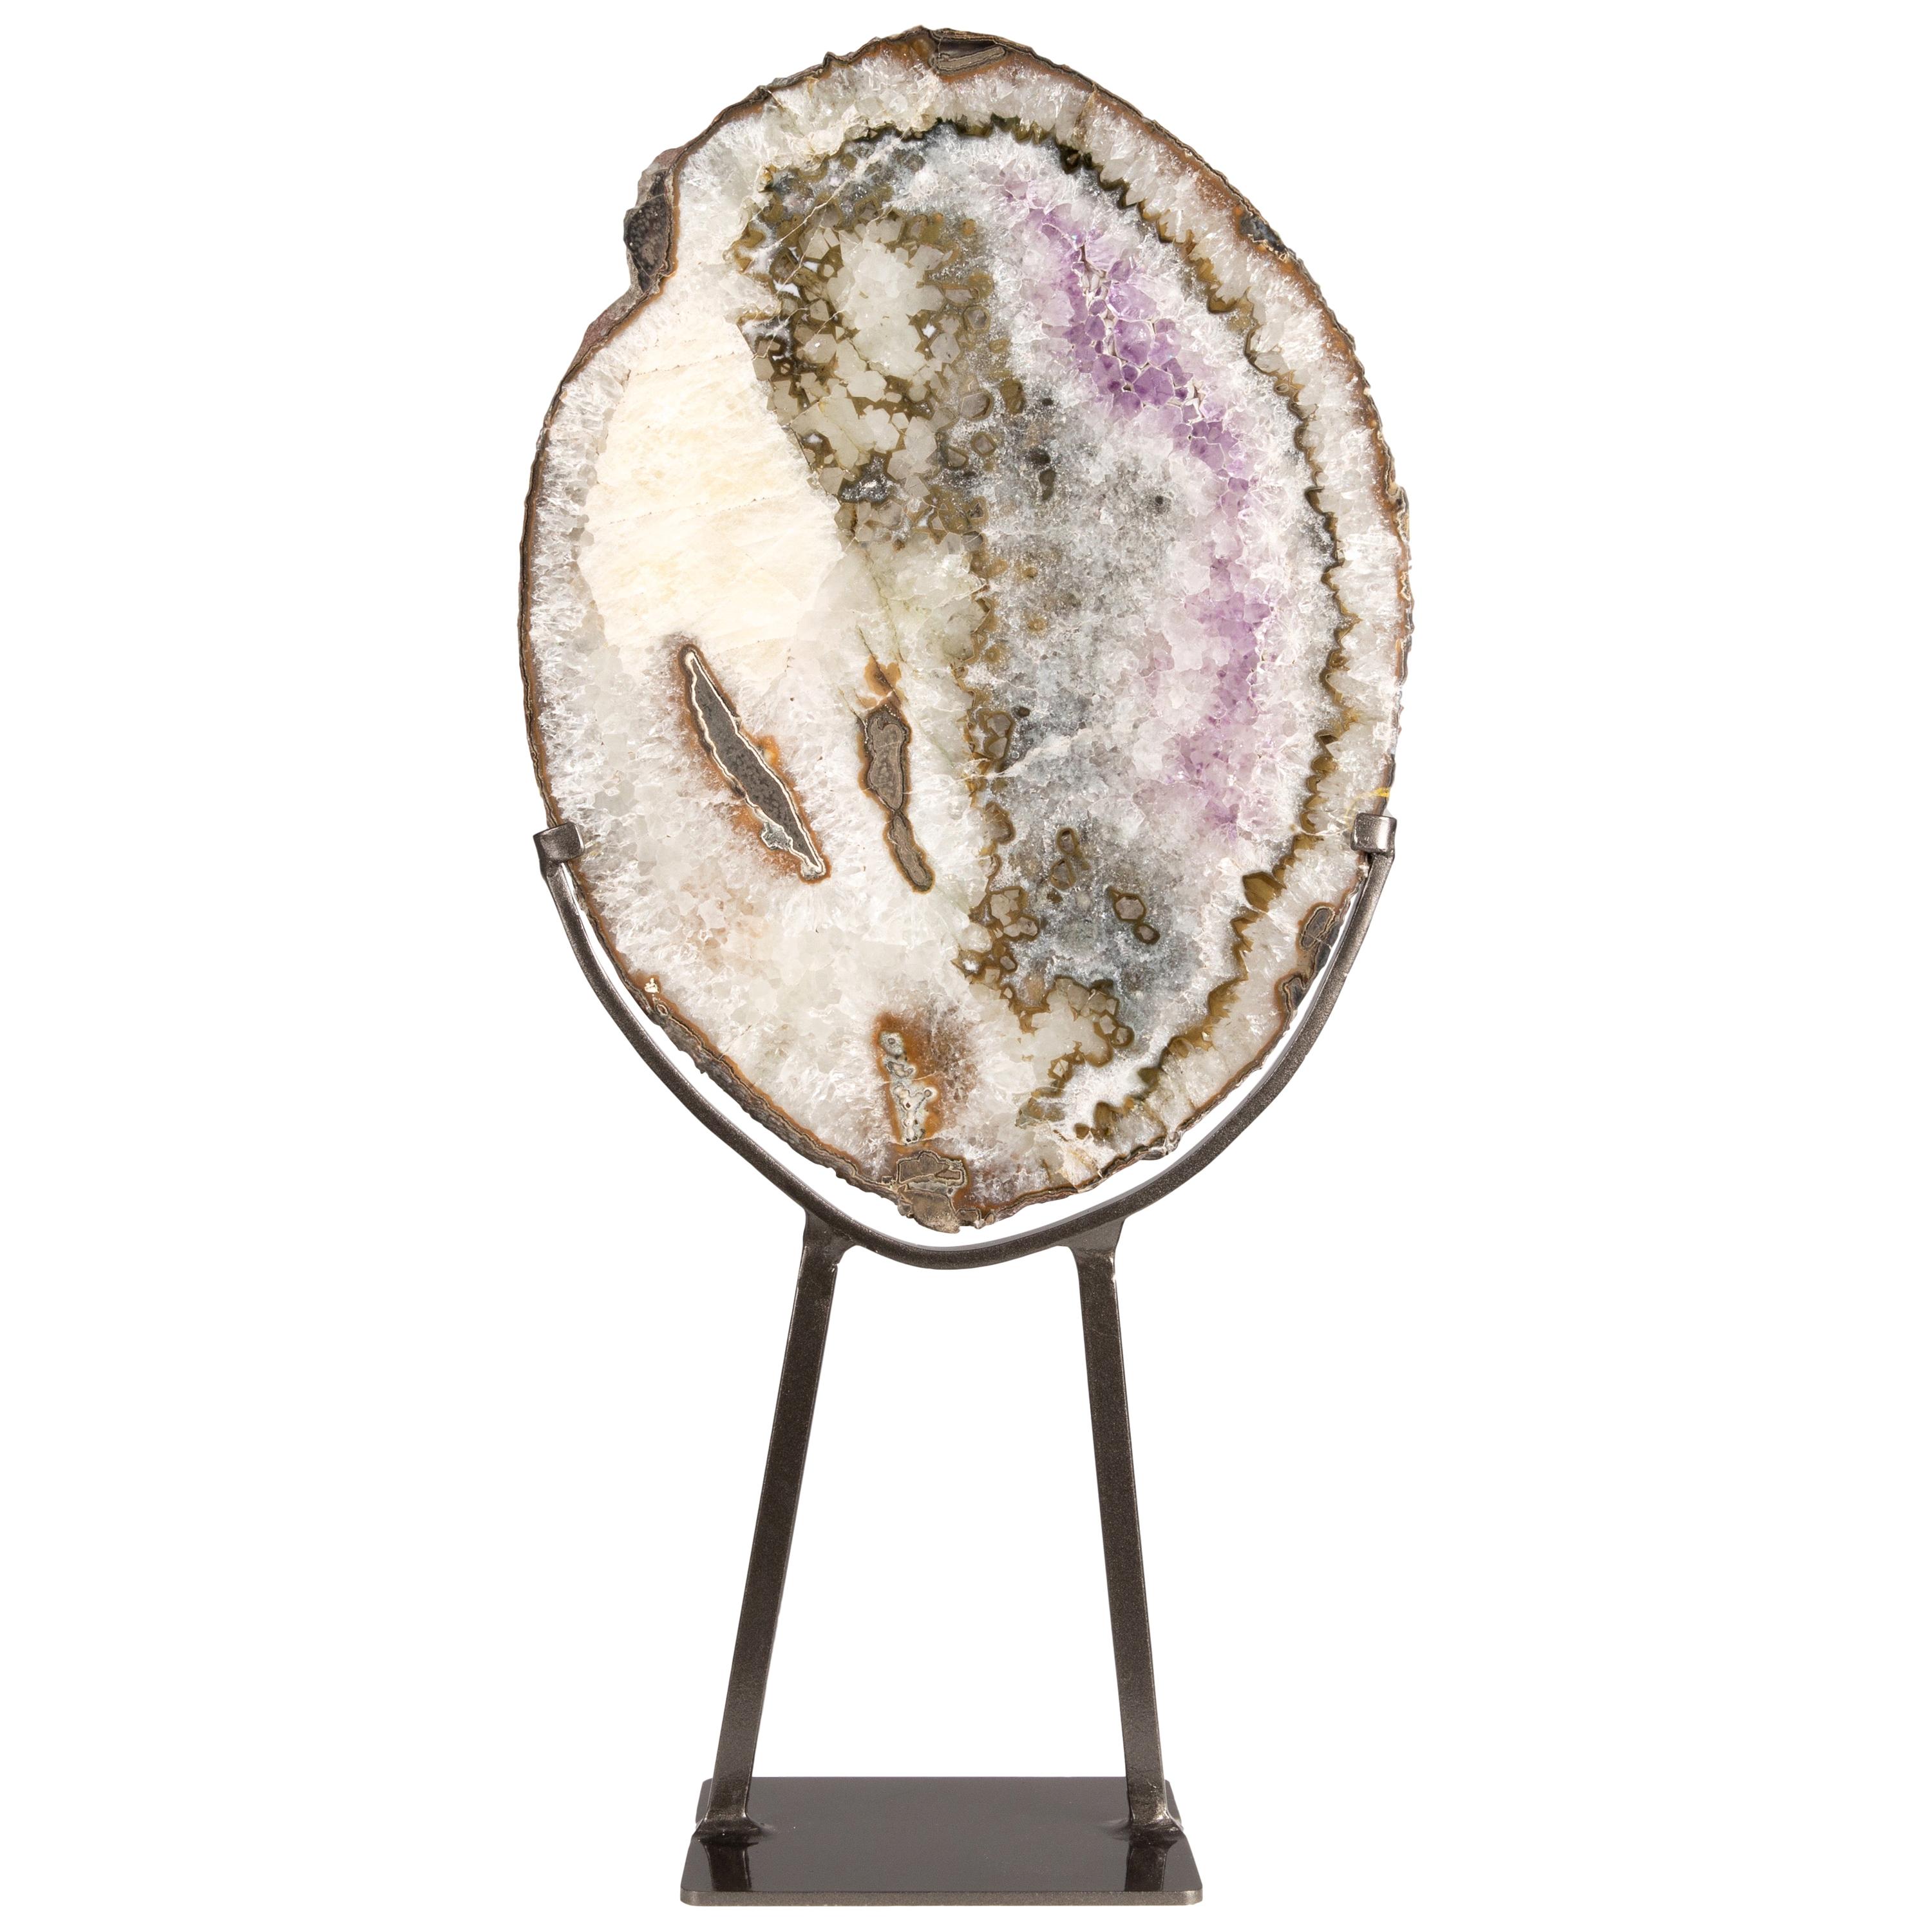 Geode Slice with Mix of Agate, White Quartz and Calcite Formation on Metal Stand